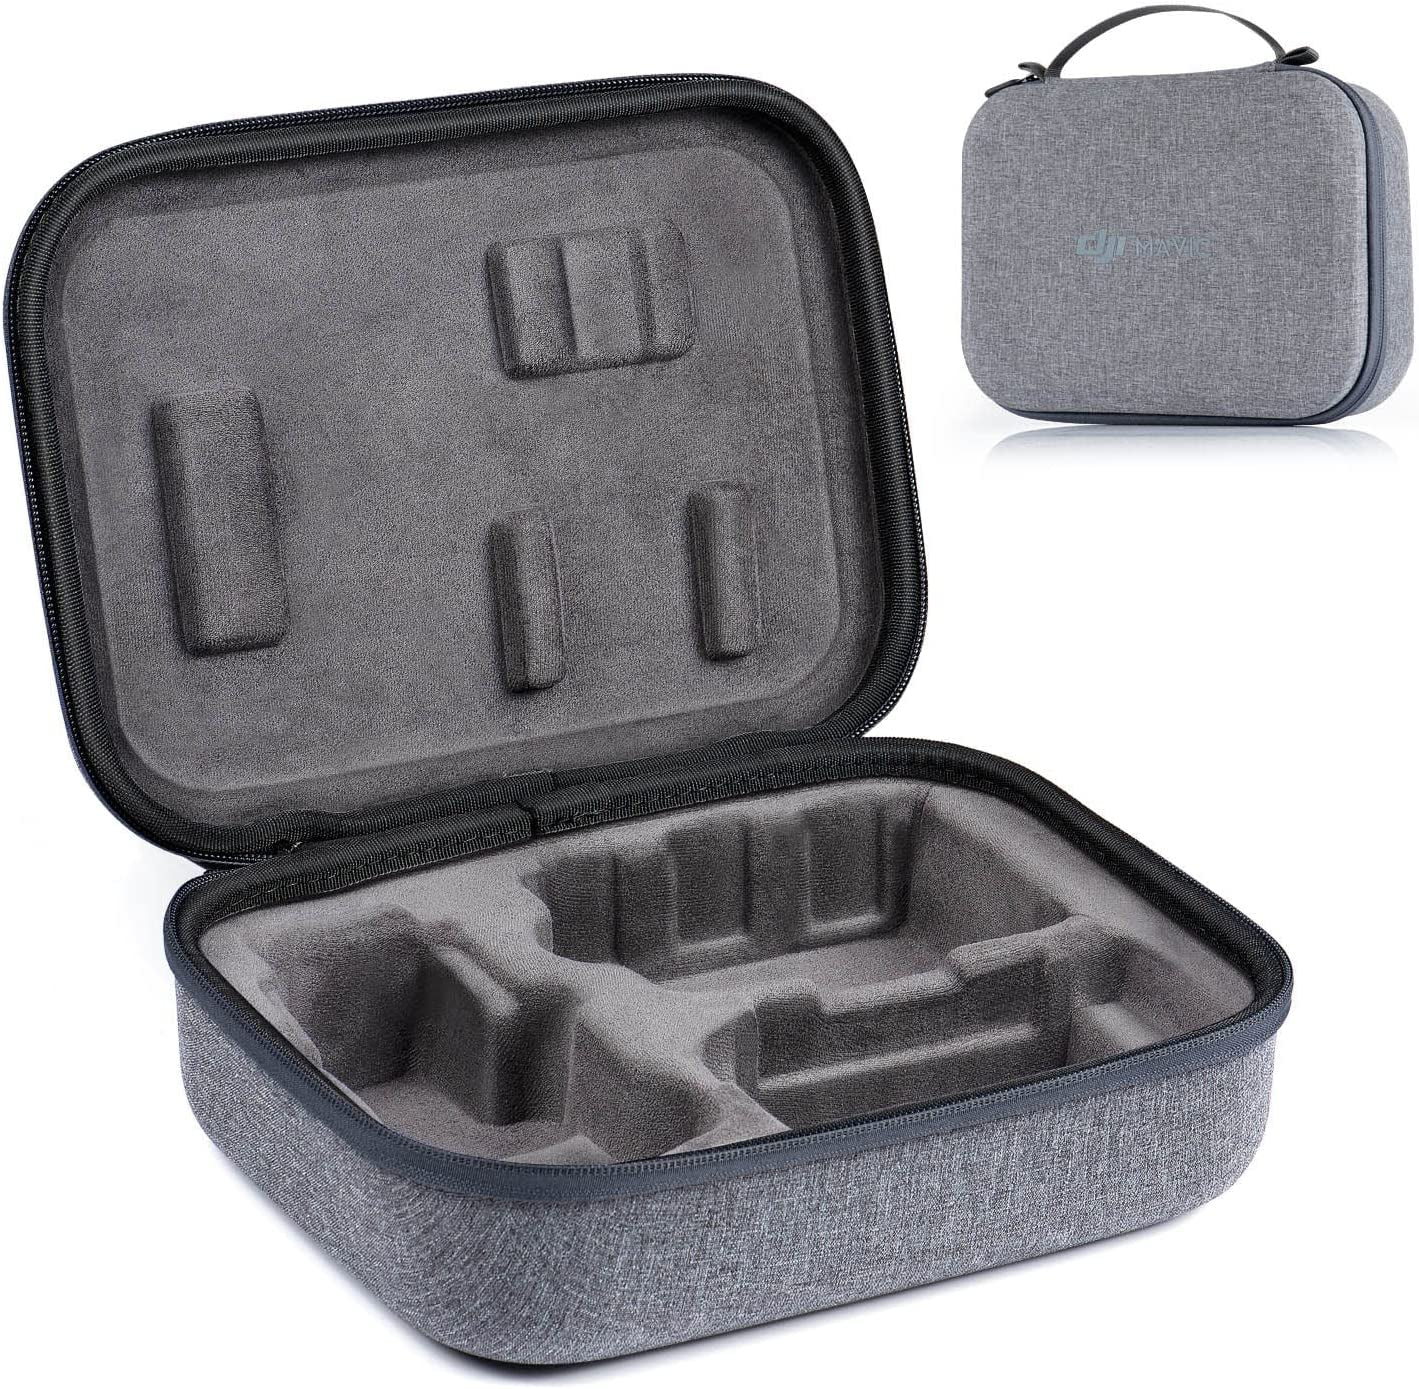 Storage Bag for DJI Mini 2-Newest Mini 2 Drone Case Hard Shell Travel  Carrying case Compatible with DJI Mini 2 Drone and Accessories-Grey.